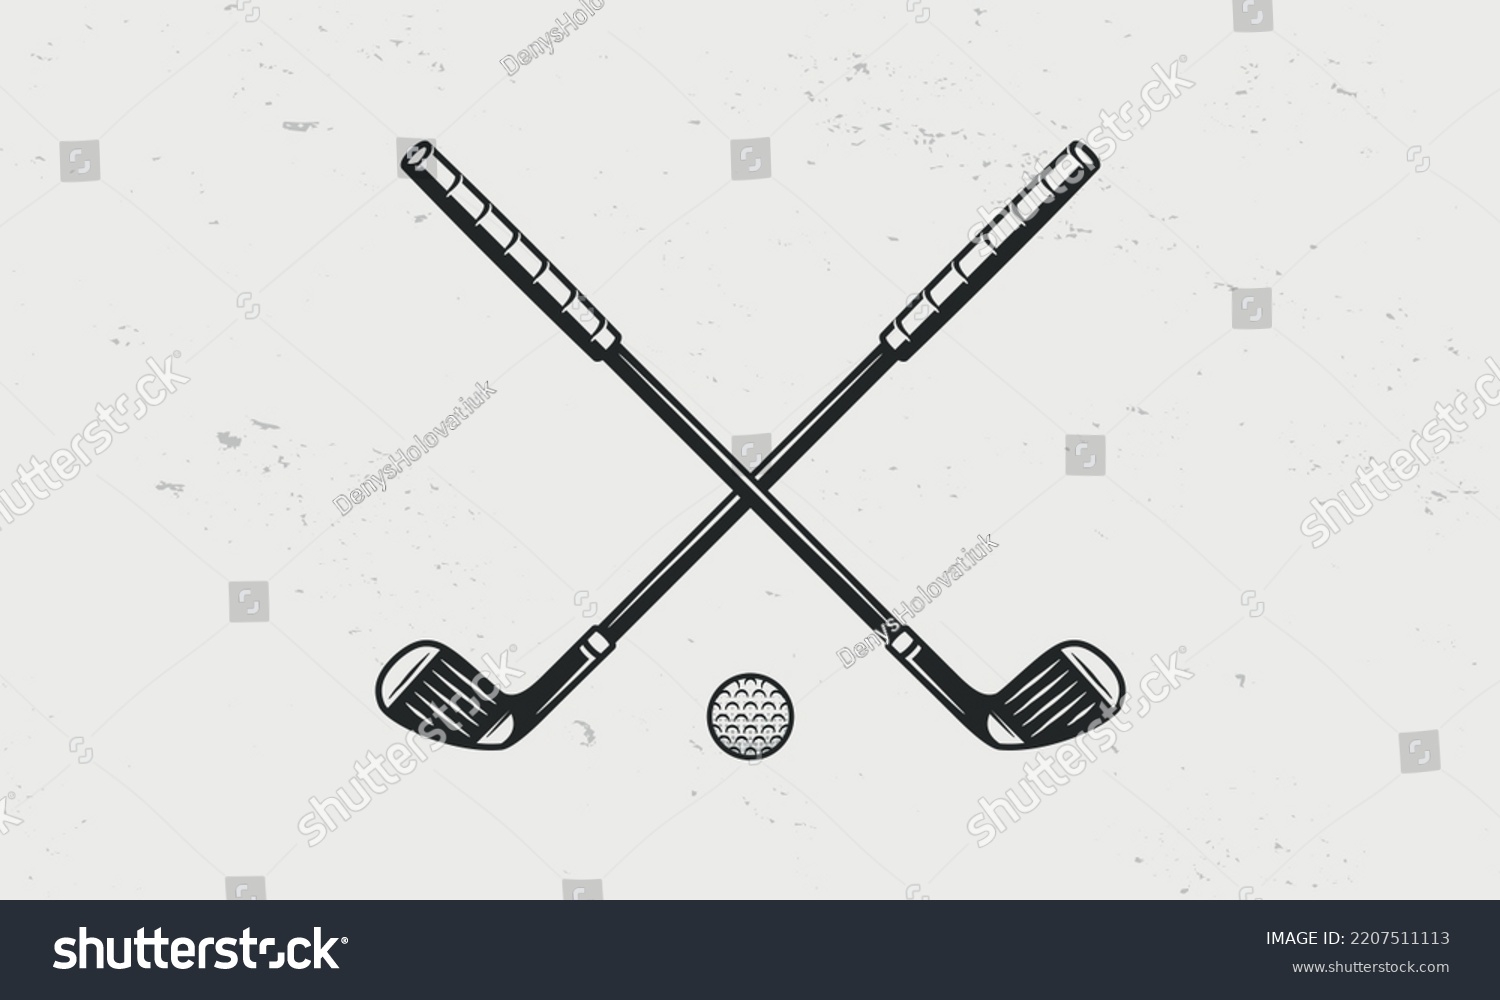 Golf clubs and ball silhouettes isolated on white background. Crossed Golf clubs. Vintage design elements for logo, badges, banners, labels. Vector illustration #2207511113